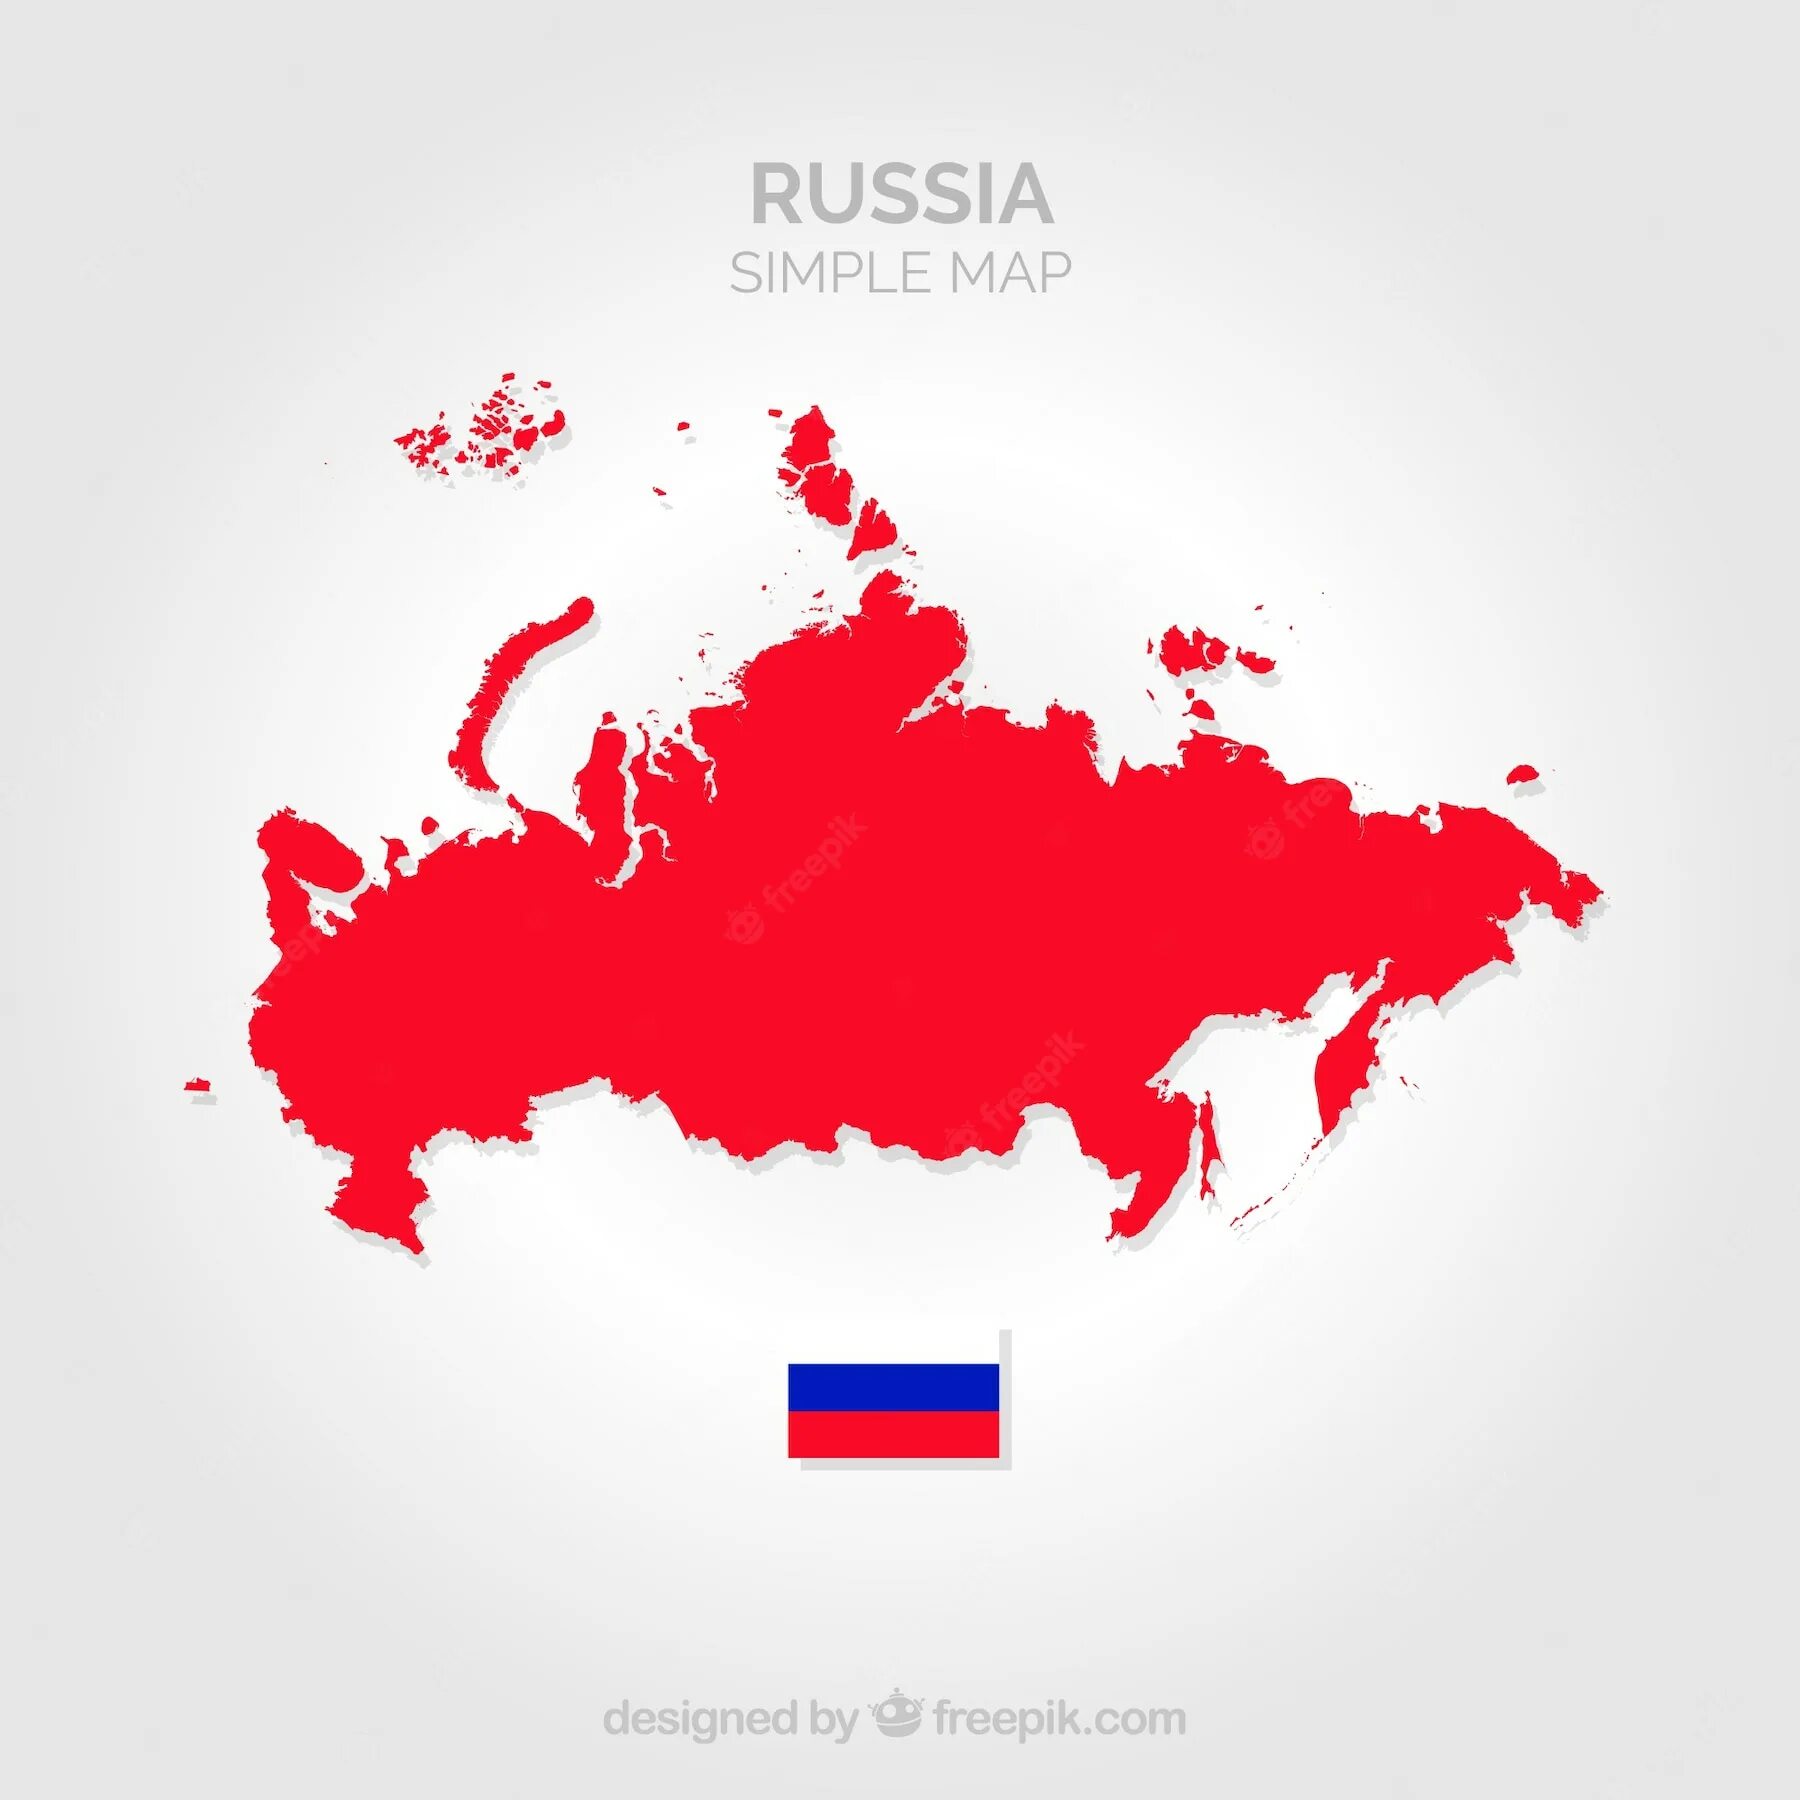 Russia is red. Карта России вектор. Карта России красная. Карта России красная вектор. Карта России силуэт.